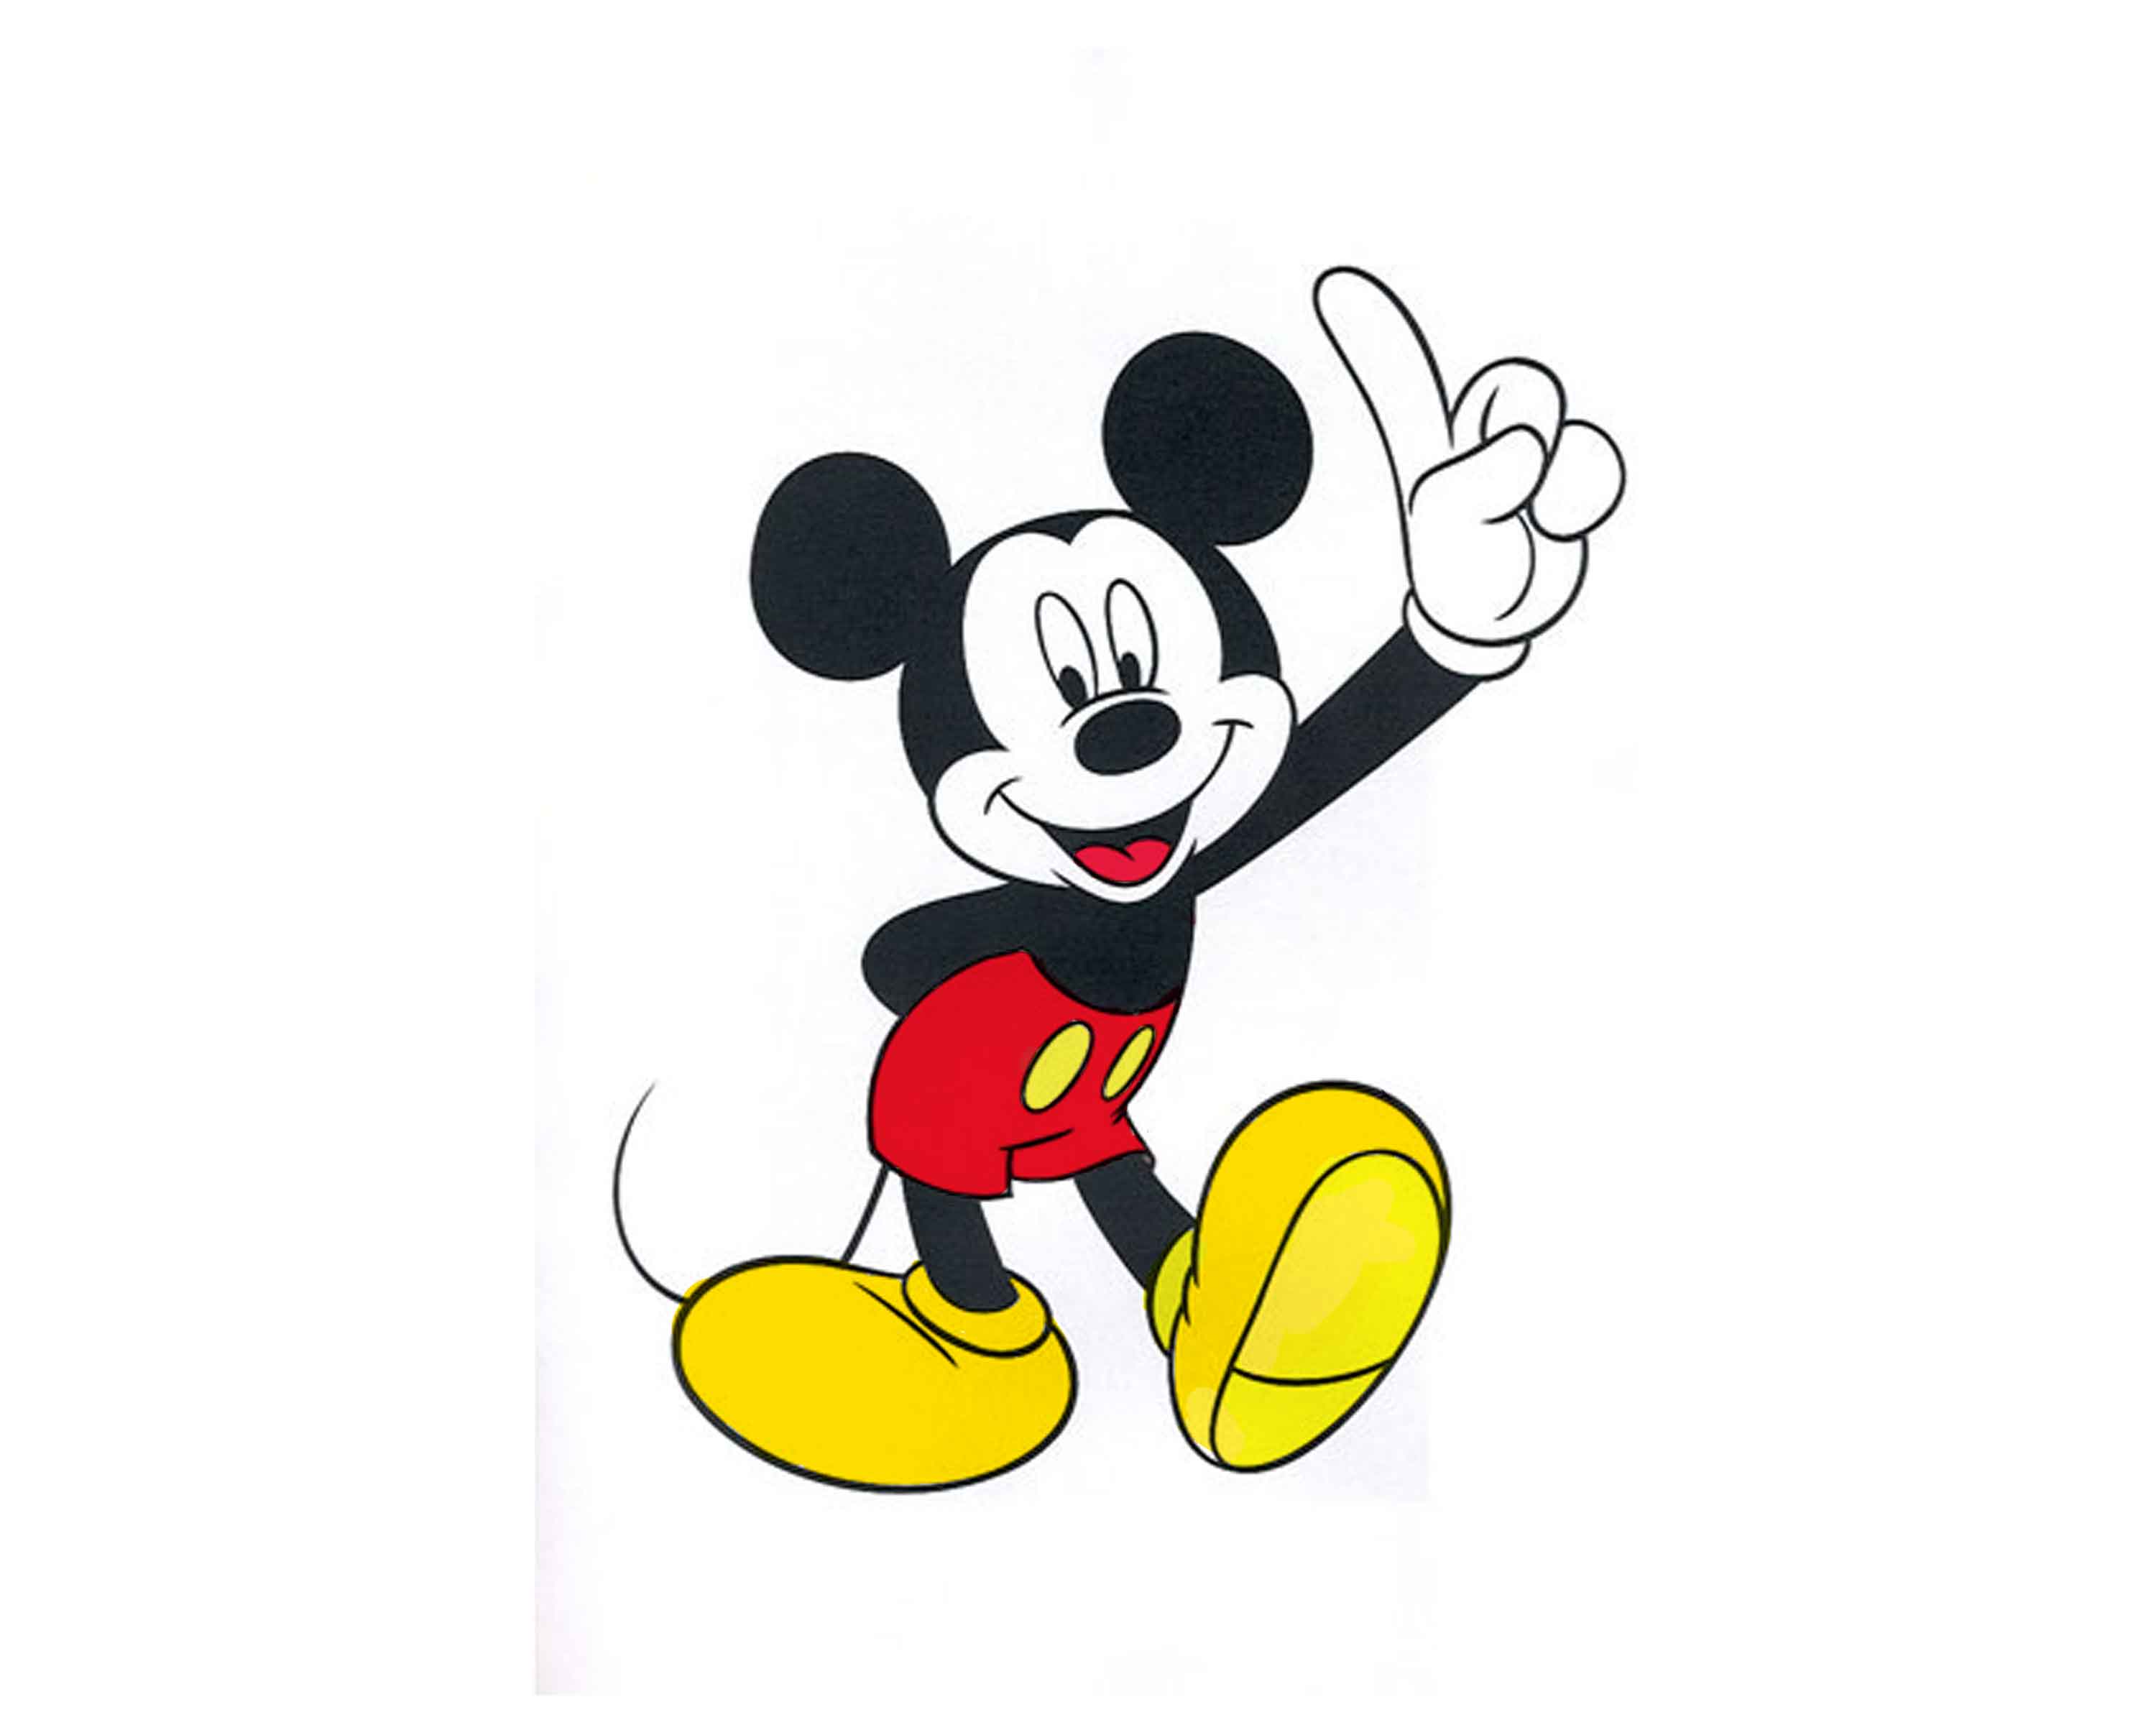 Mickey Mouse Face Images   Thecelebritypix